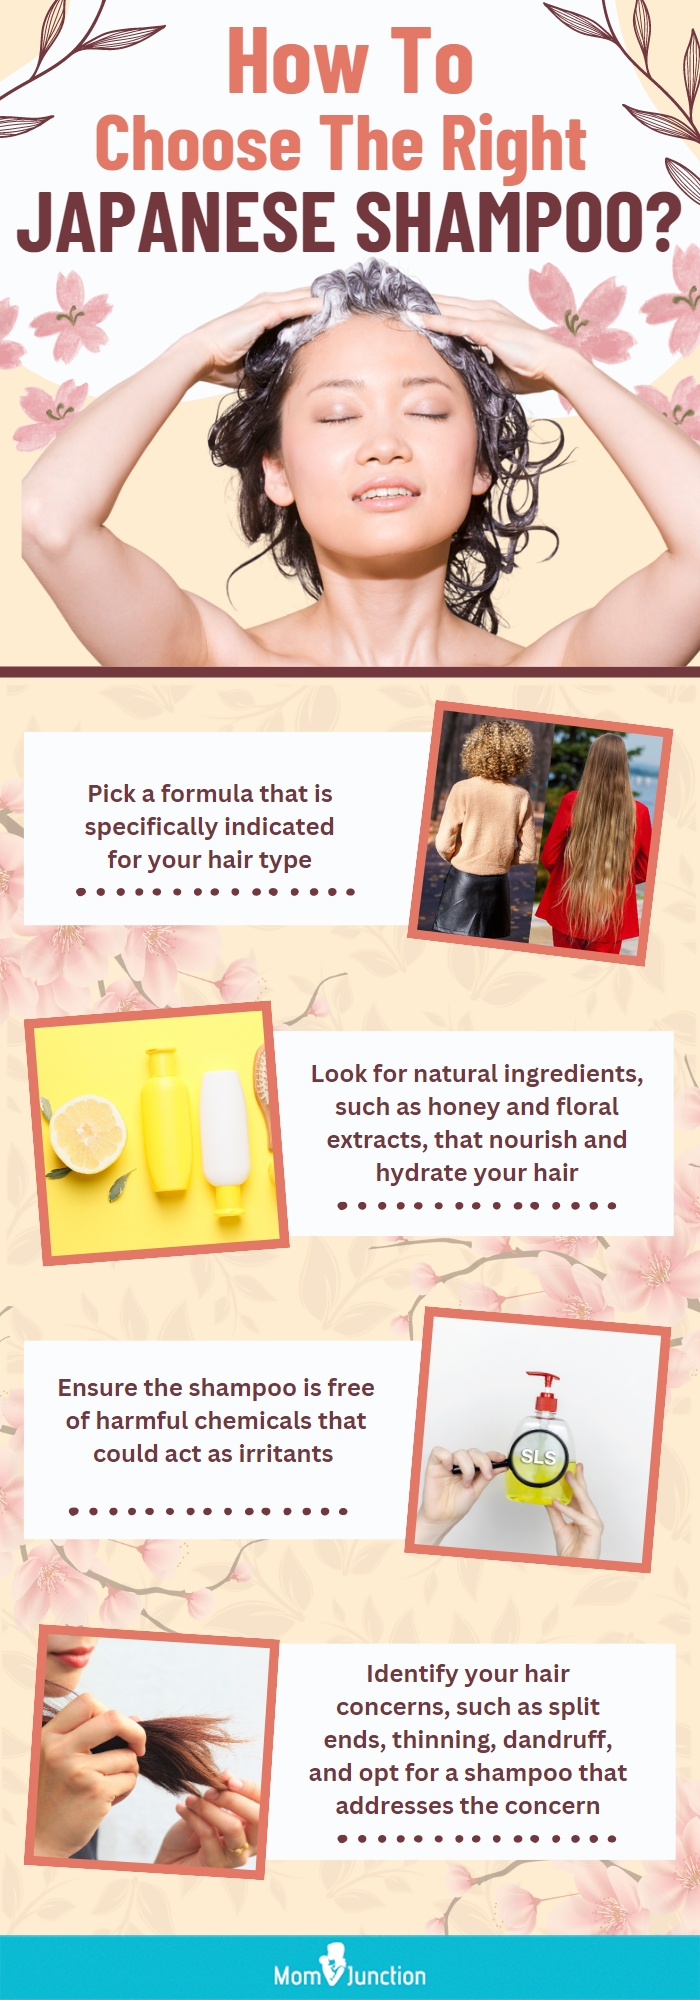 How To Choose The Right Japanese Shampoo (infographic)